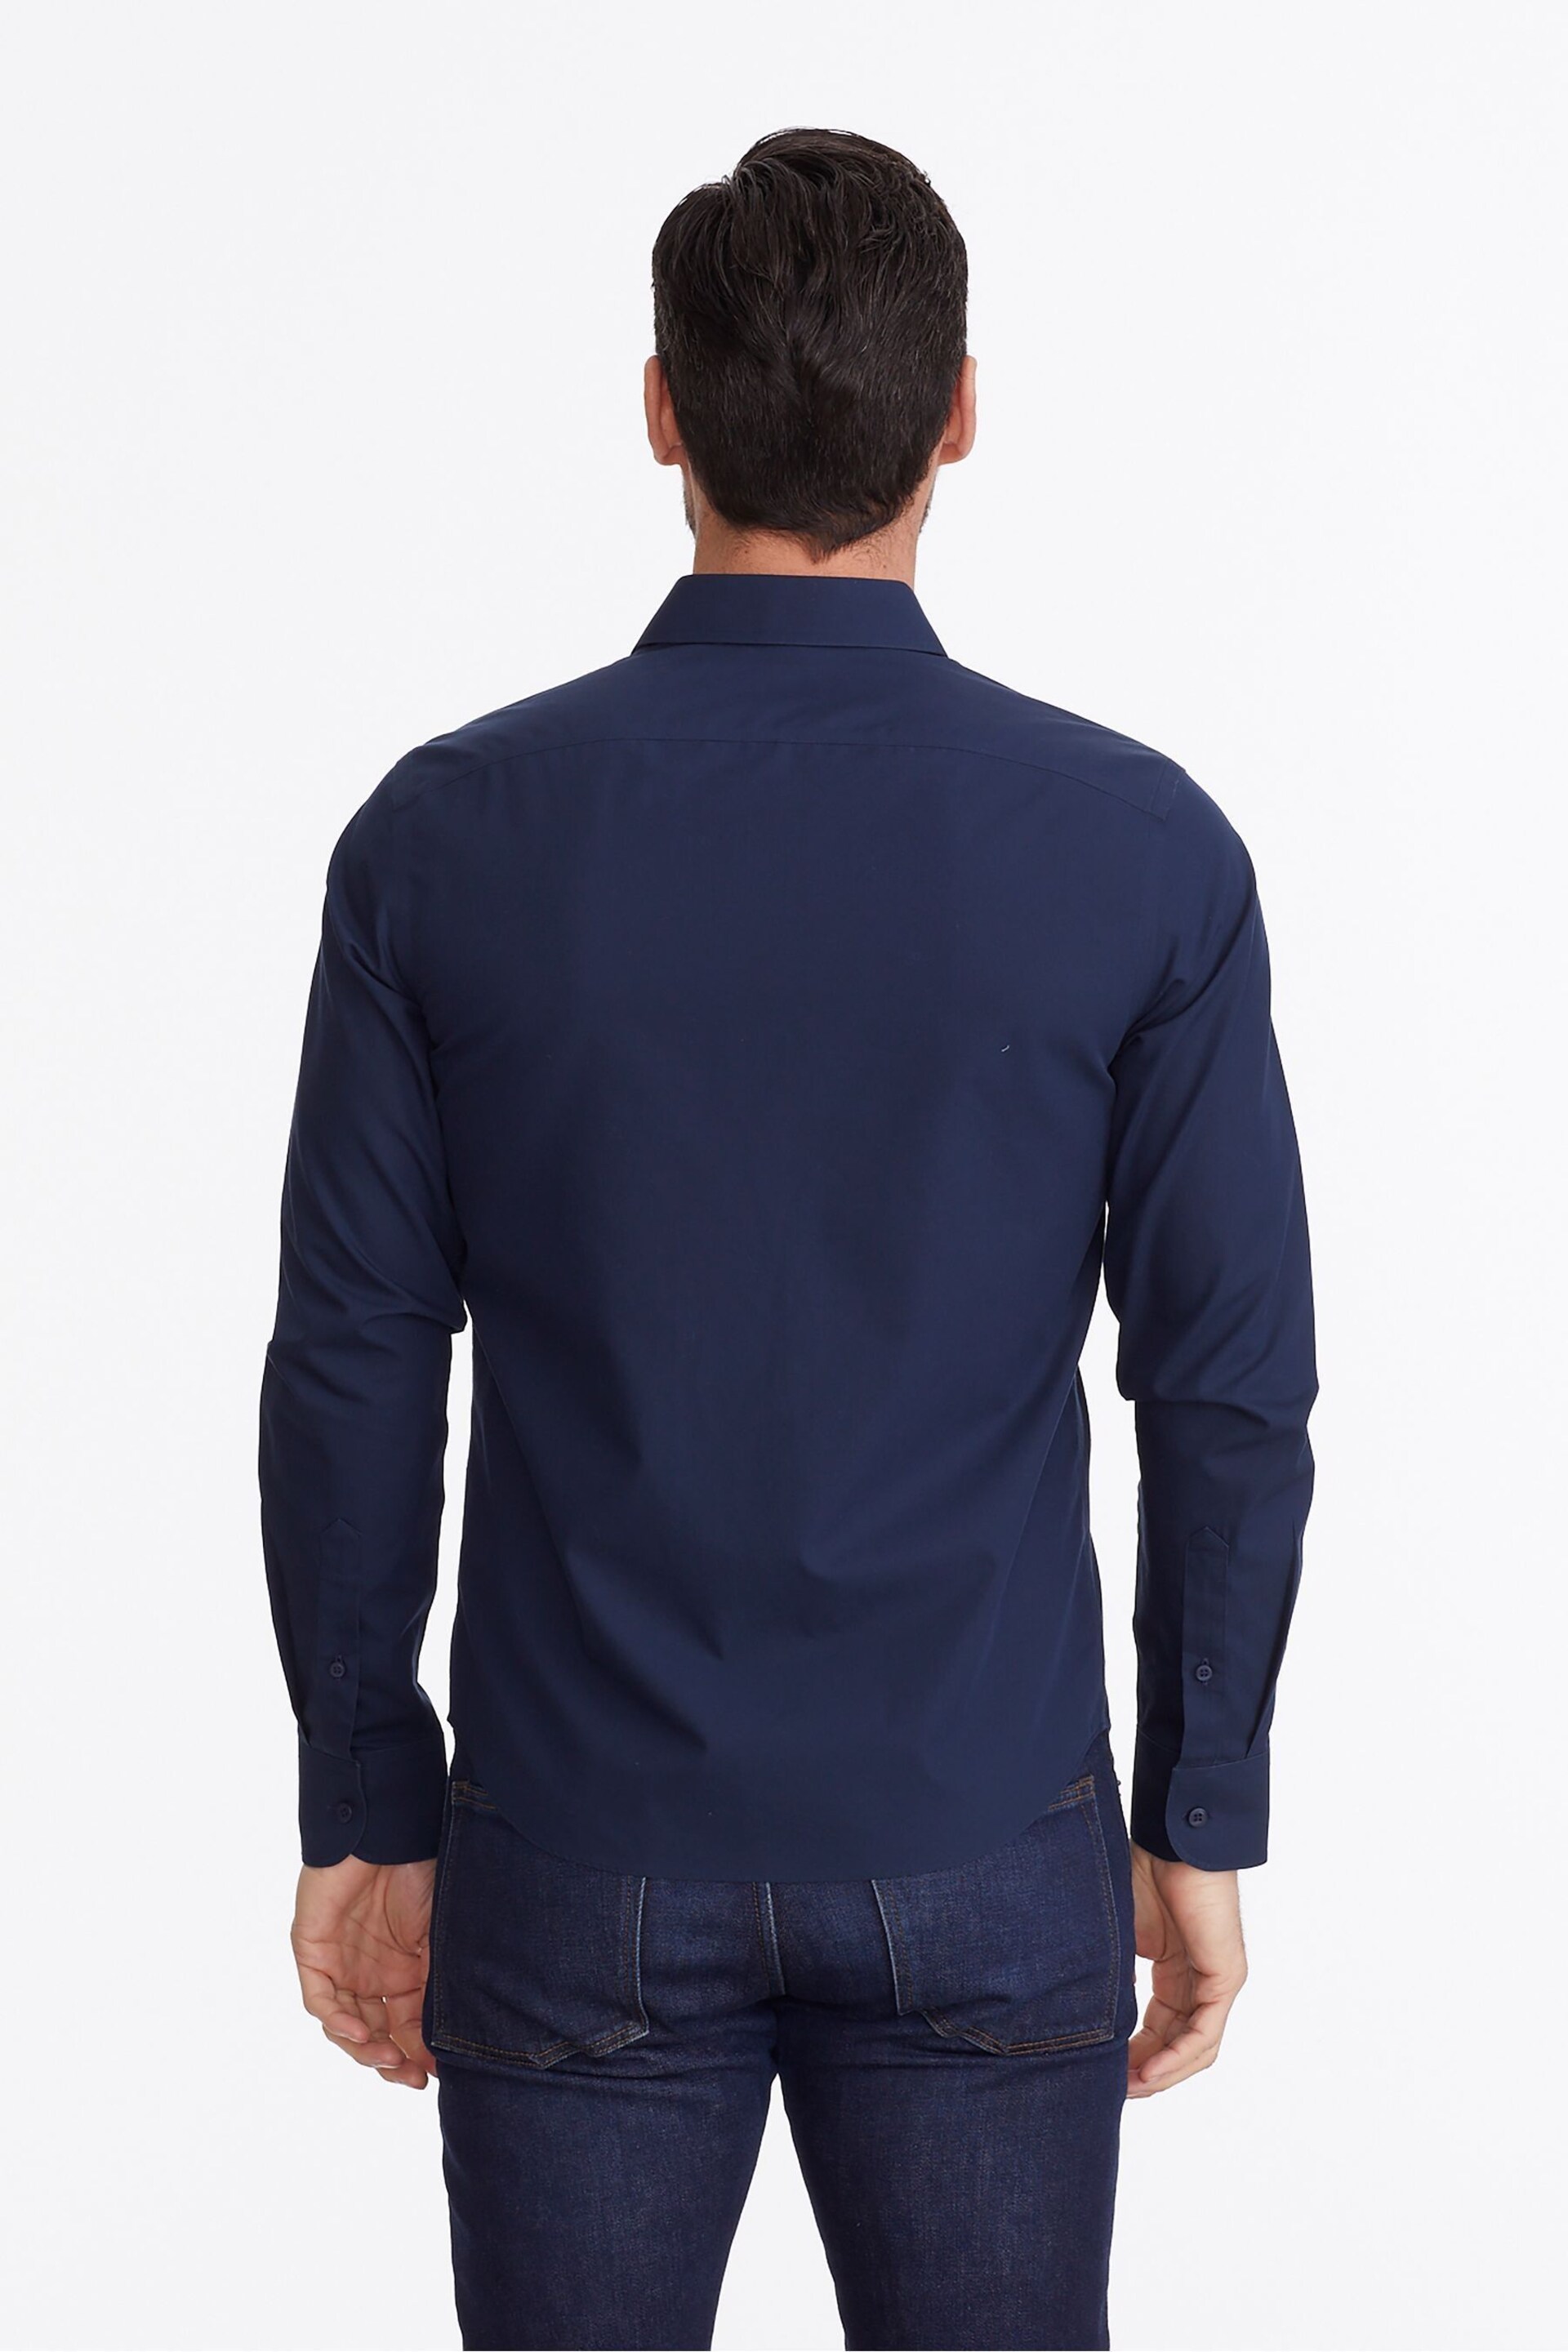 UNTUCKit Navy Wrinkle-Free Relaxed Fit Castello Shirt - Image 2 of 6